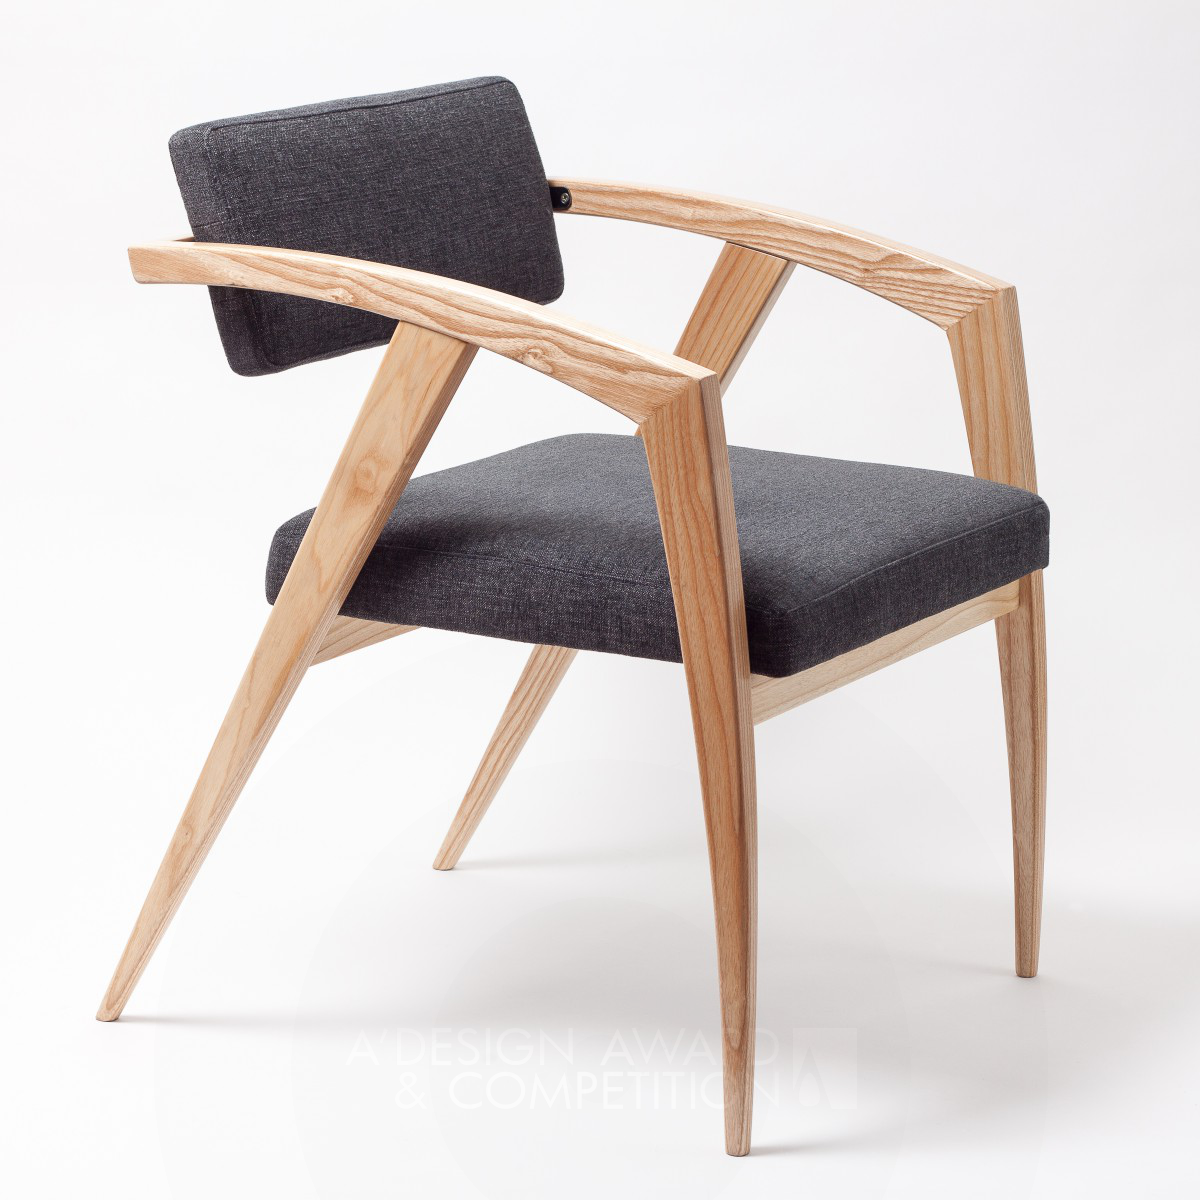 Mantis Chair by Claudio Sibille